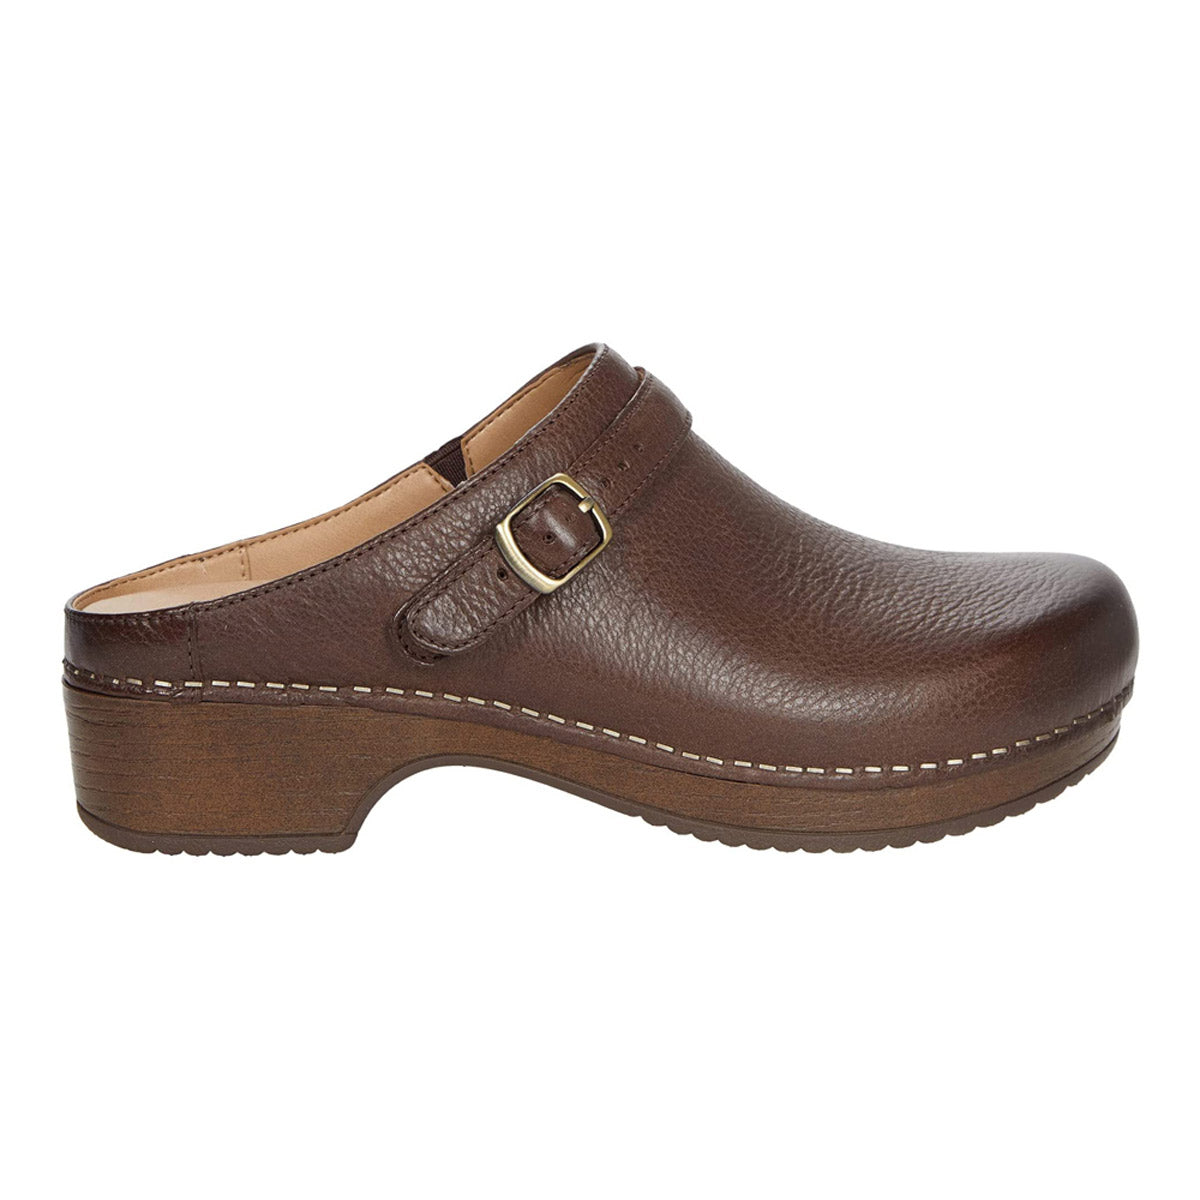 Brown leather Dansko Berry Mule with buckle detail on a white background.
Product Name: Dansko Berry Brown Milled Burnished - Womens
Brand Name: Dansko